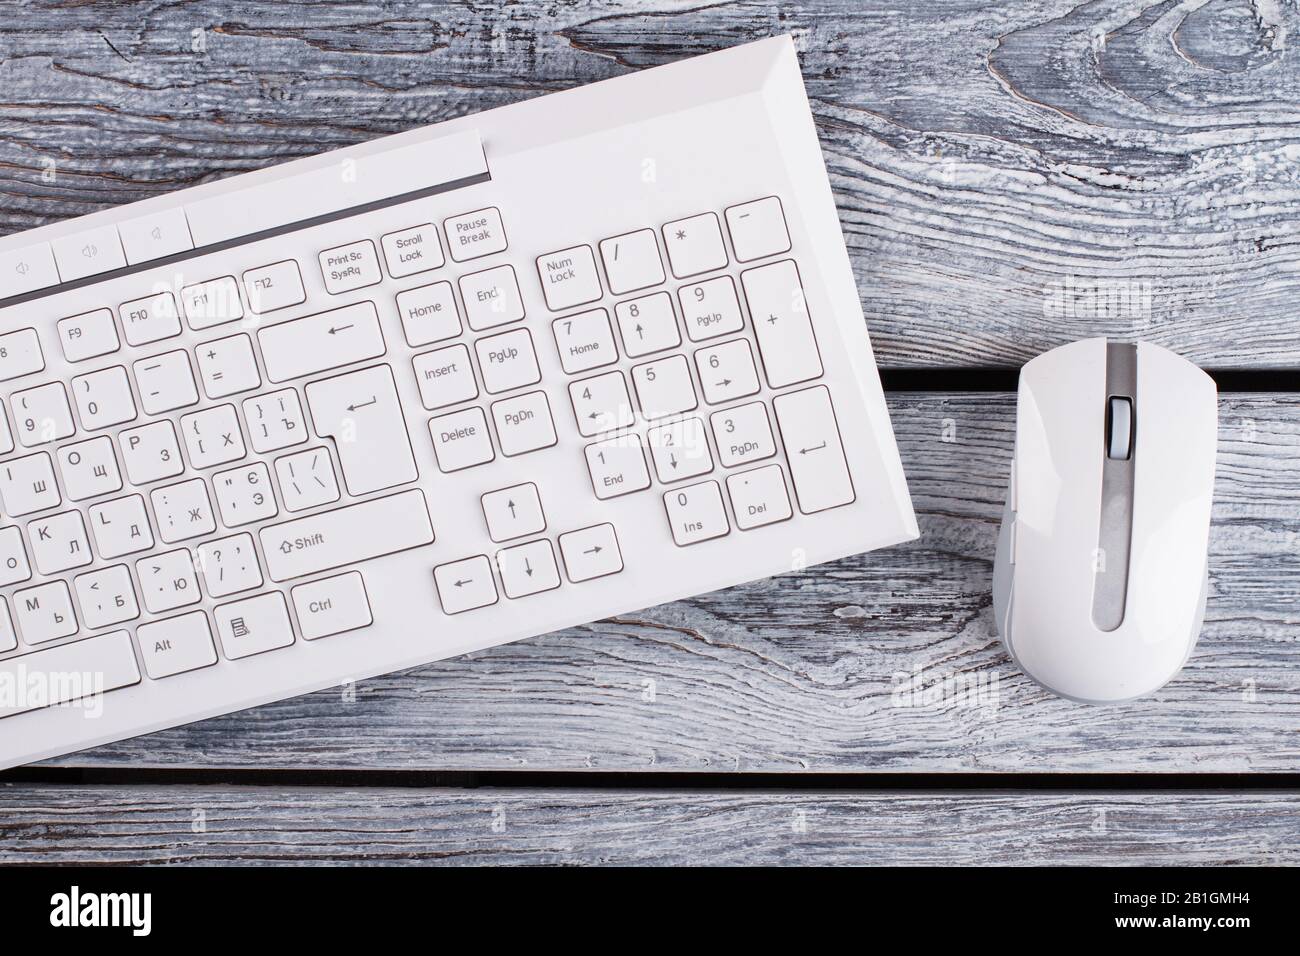 White keyboard and optical mouse on background. Stock Photo